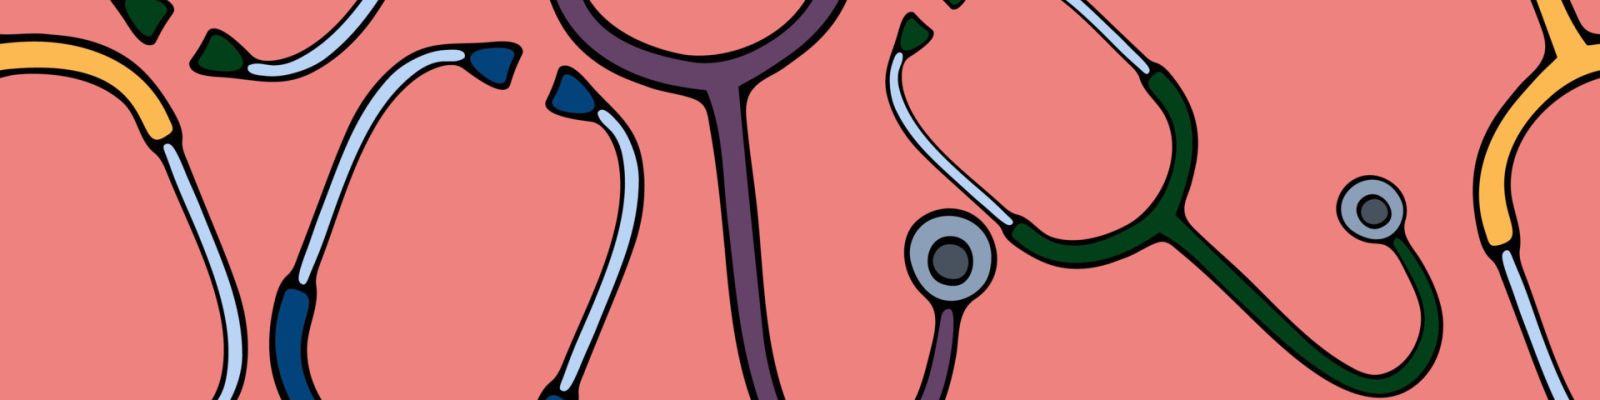 stethoscope-medical-diagnostic-device-repeating-pattern-isolated-green-background-seamless-medical-ornament-cartoon-style-health-topic-doctor-s-tool-vector